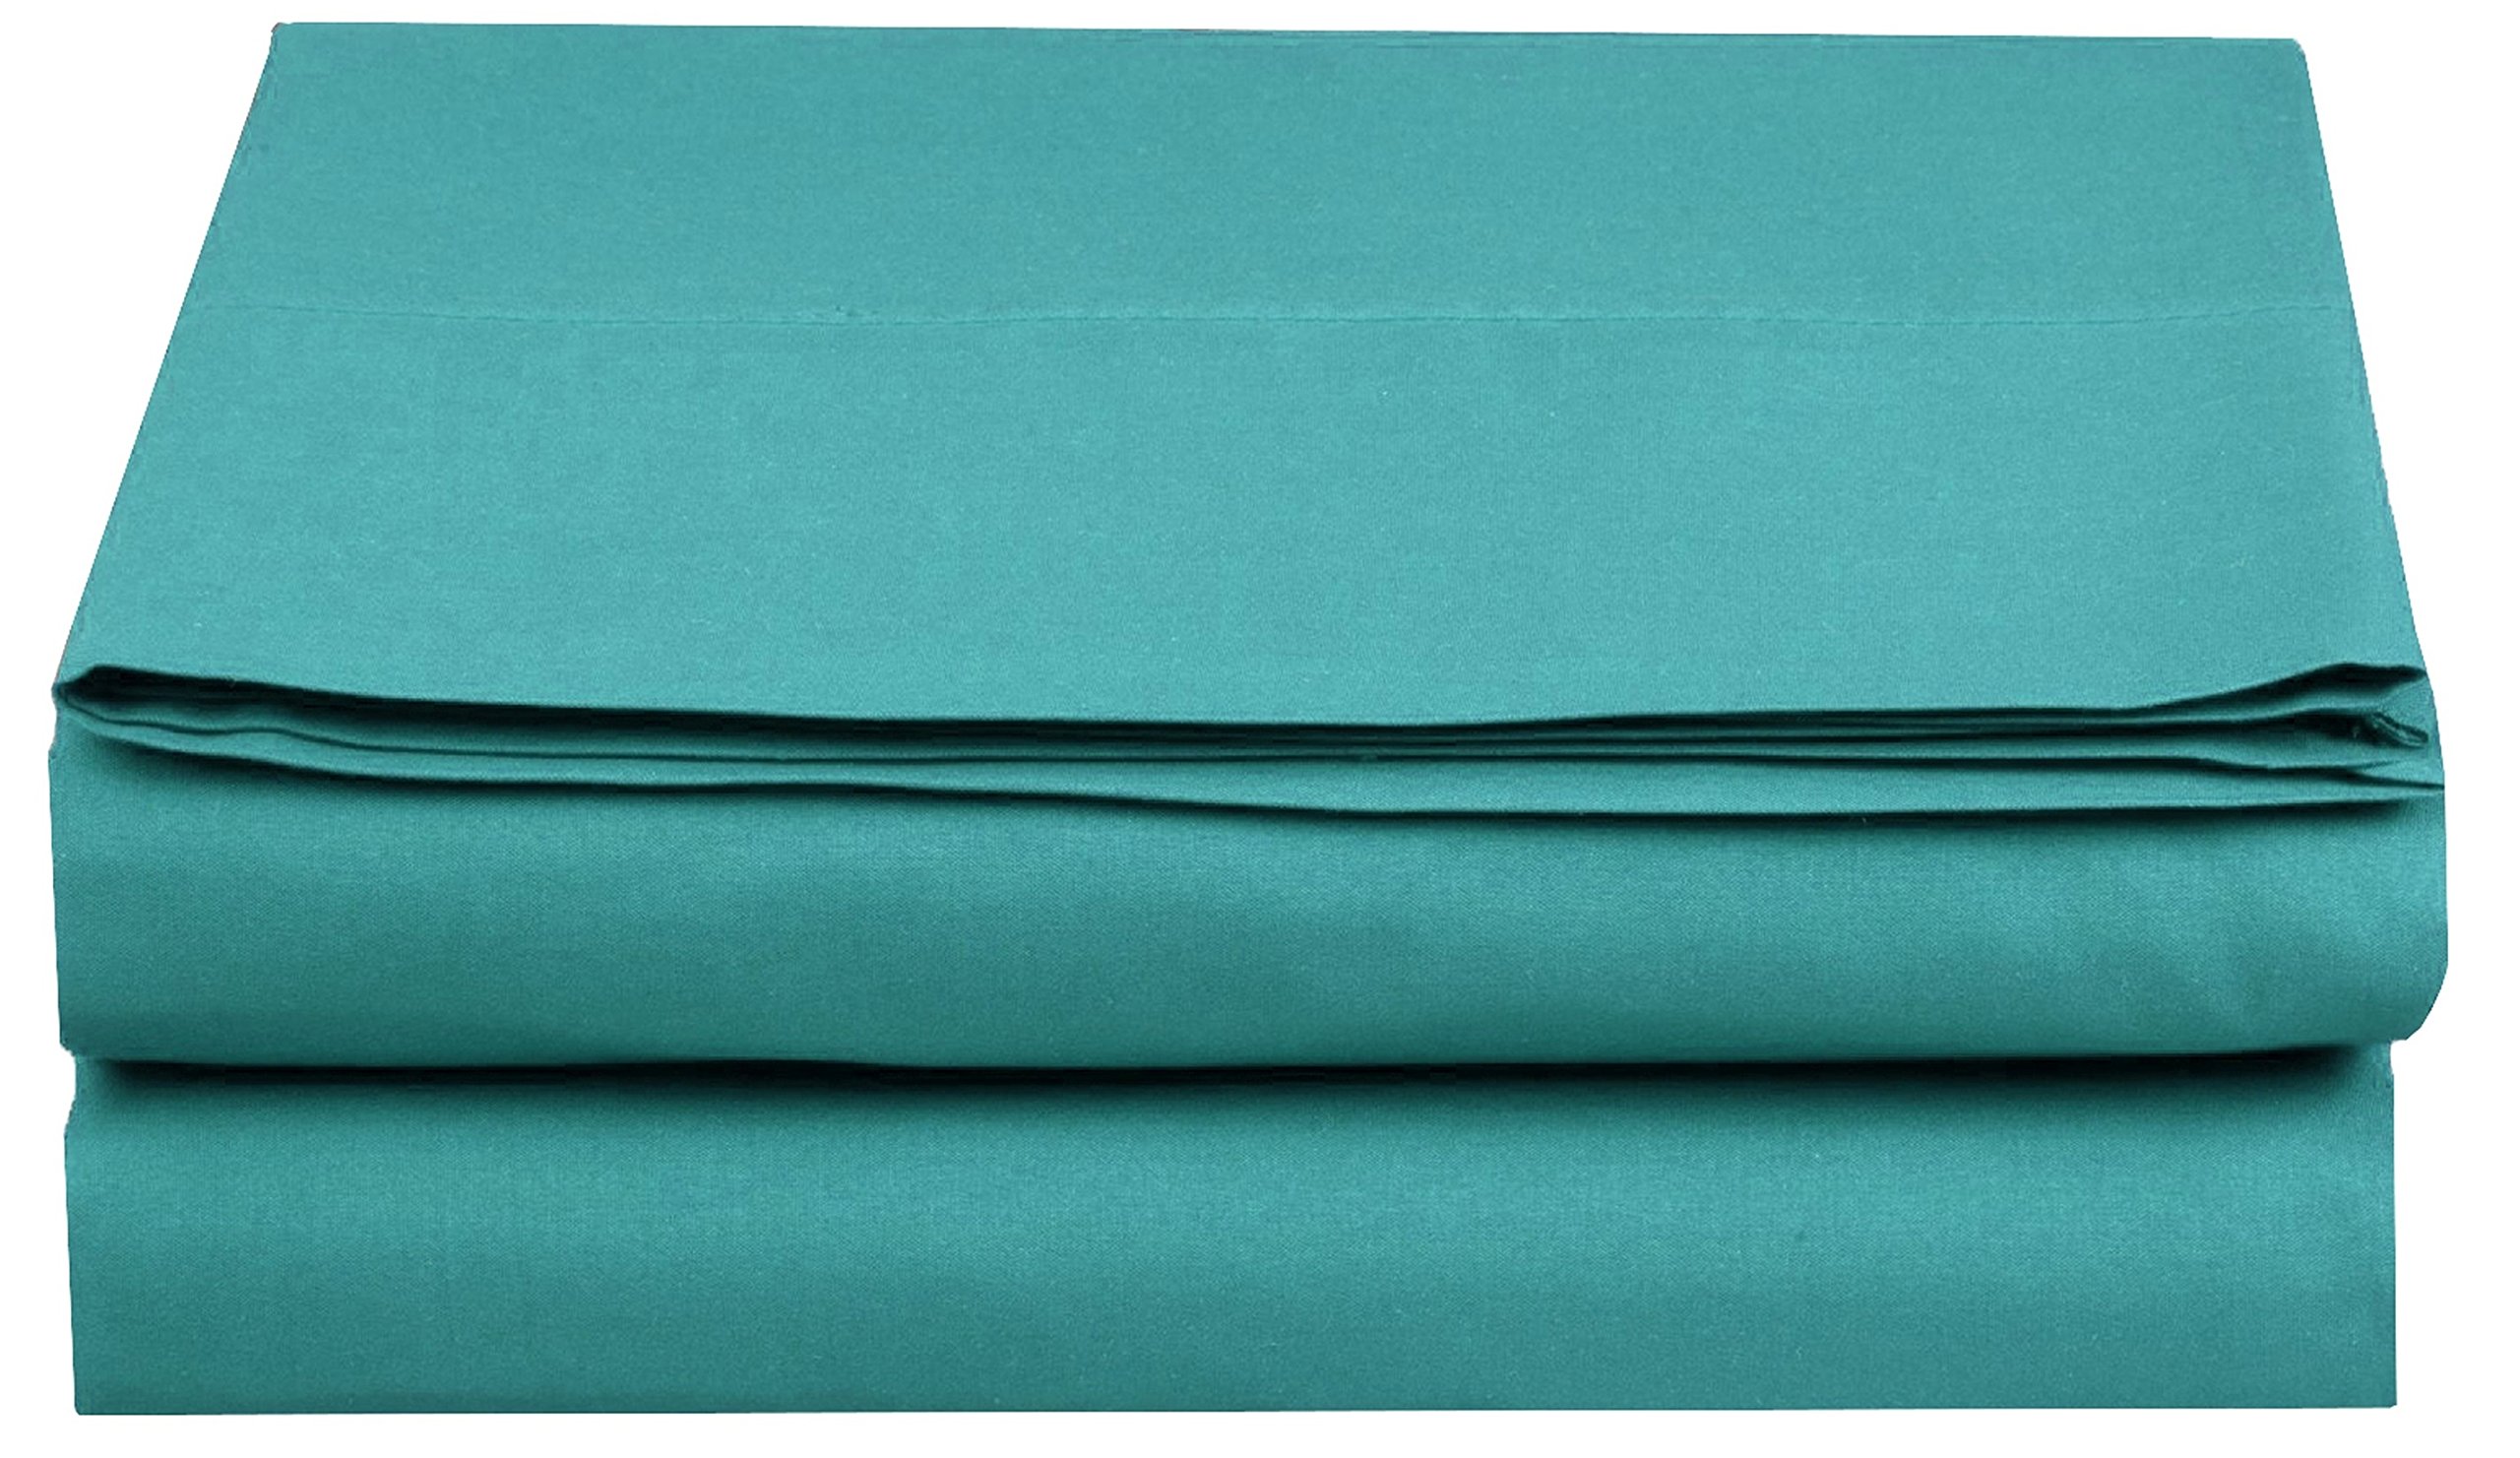 Book Cover Luxury Fitted Sheet on Amazon Elegant Comfort Wrinkle-Free 1500 Thread Count Egyptian Quality 1-Piece Fitted Sheet, Queen Size, Turquoise